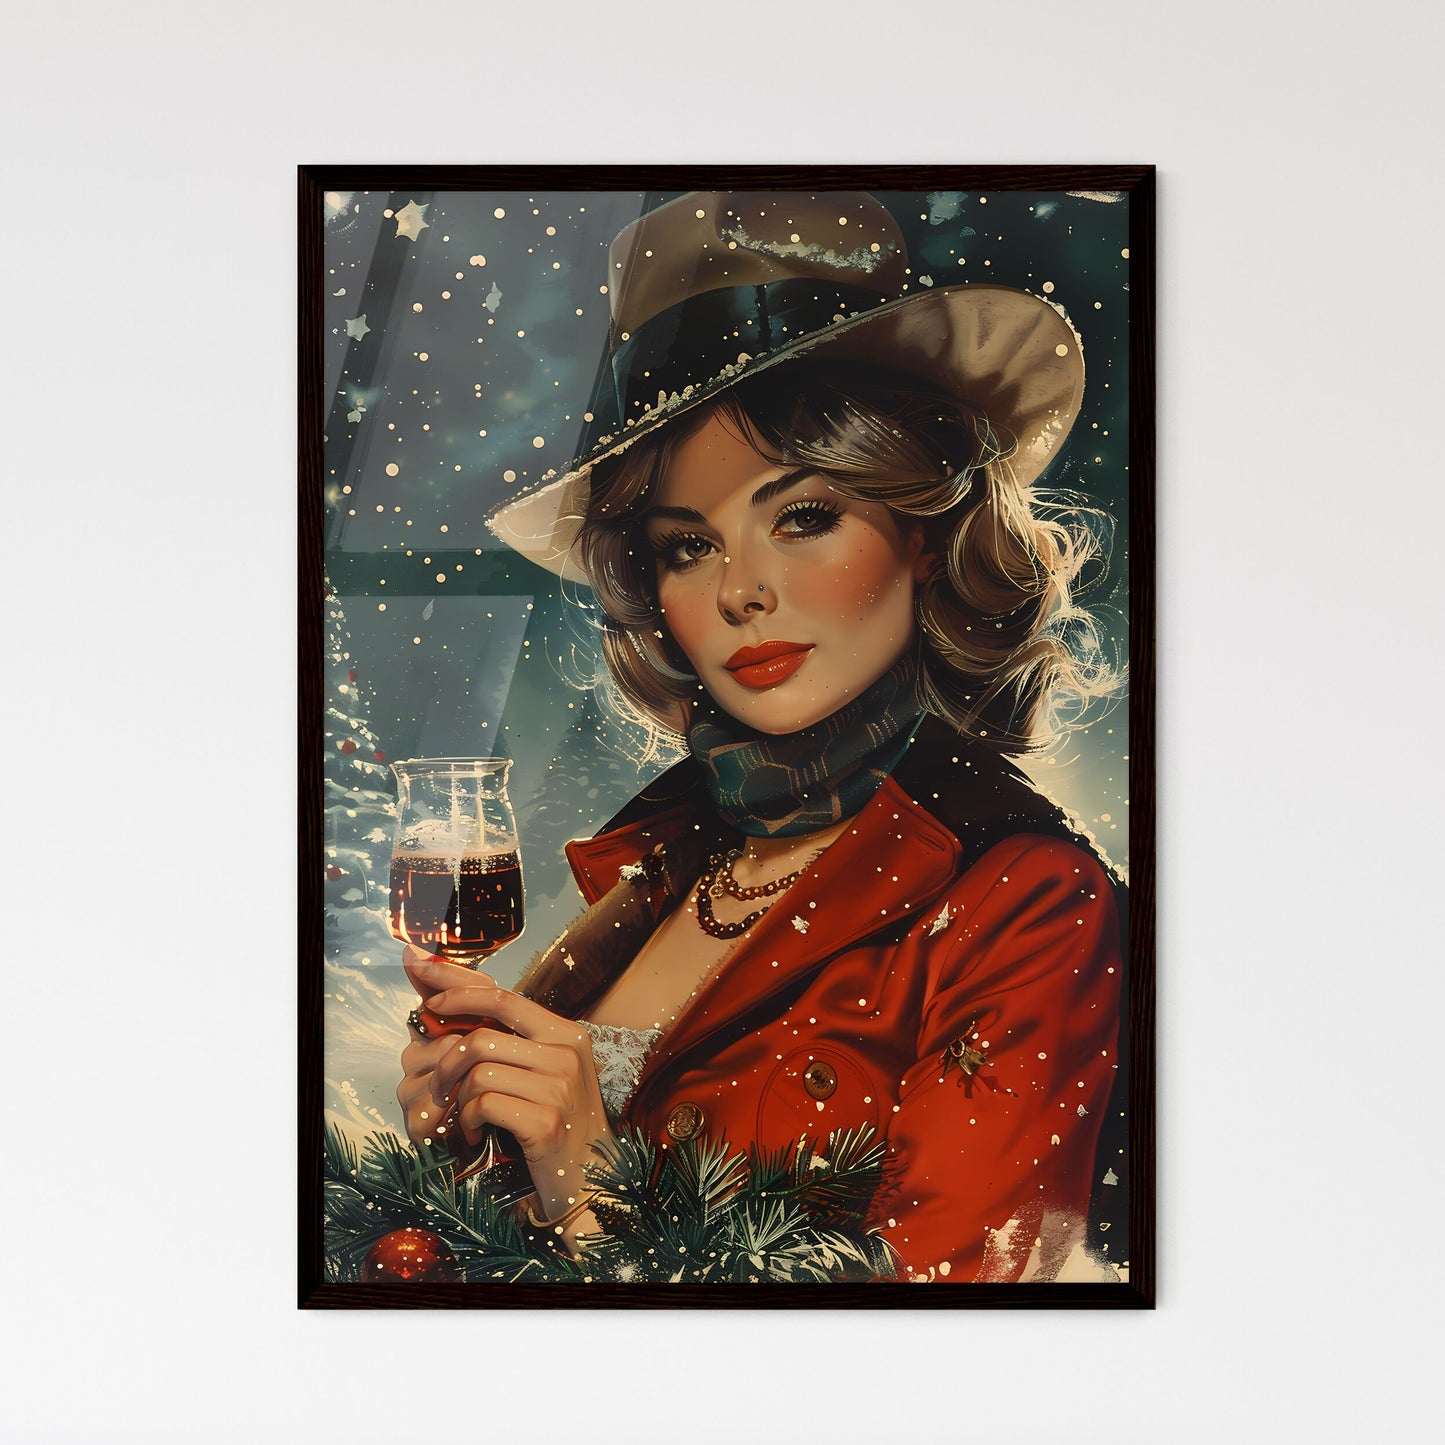 Mid-Century Modern Vintage 1970s New Year's Eve Painting: Woman with Wine Glass Default Title